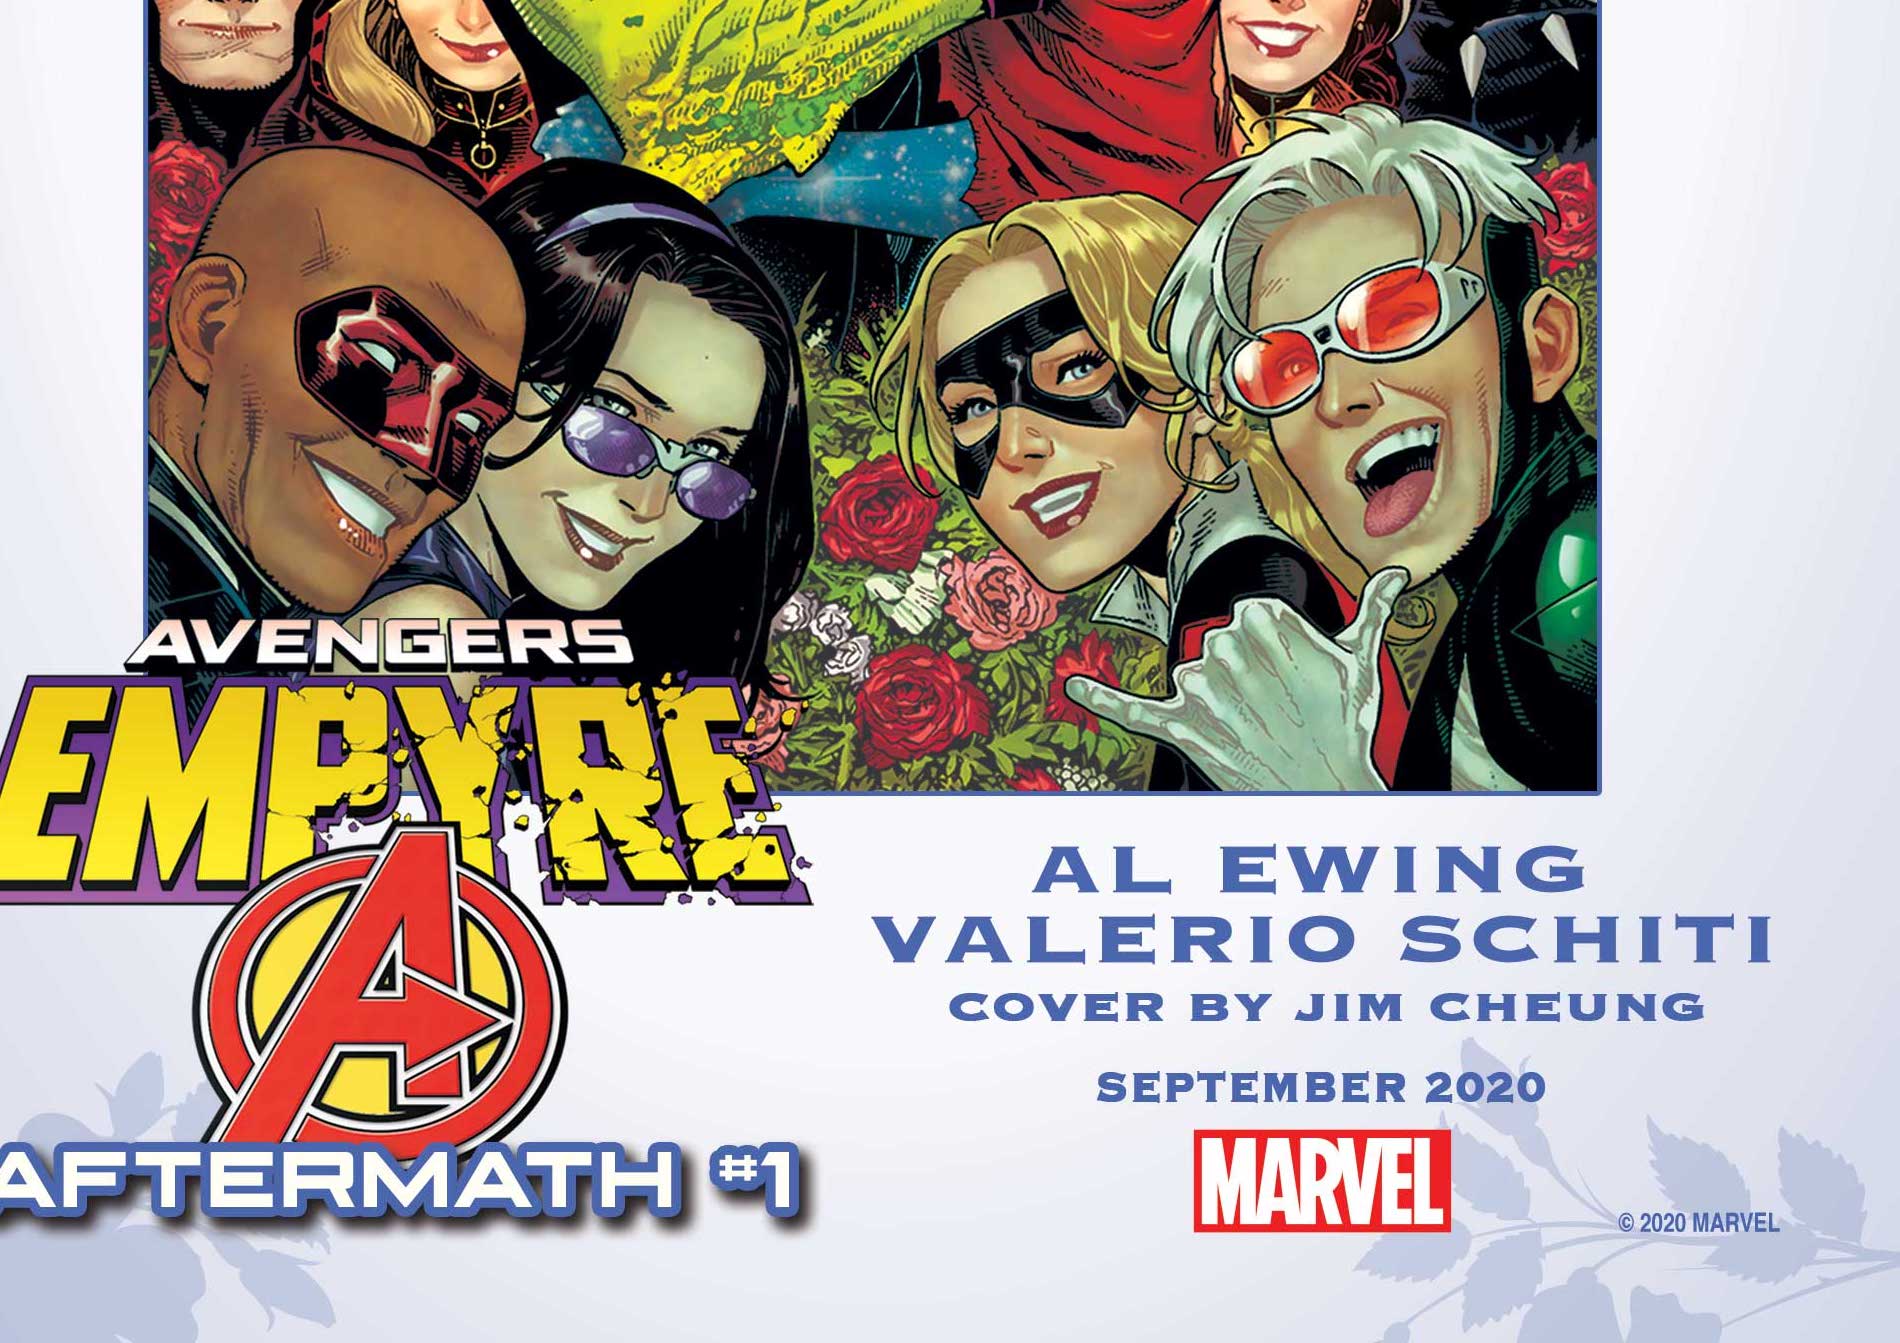 'Empyre: Avengers Aftermath' #1 to celebrate the union of two Marvel heroes